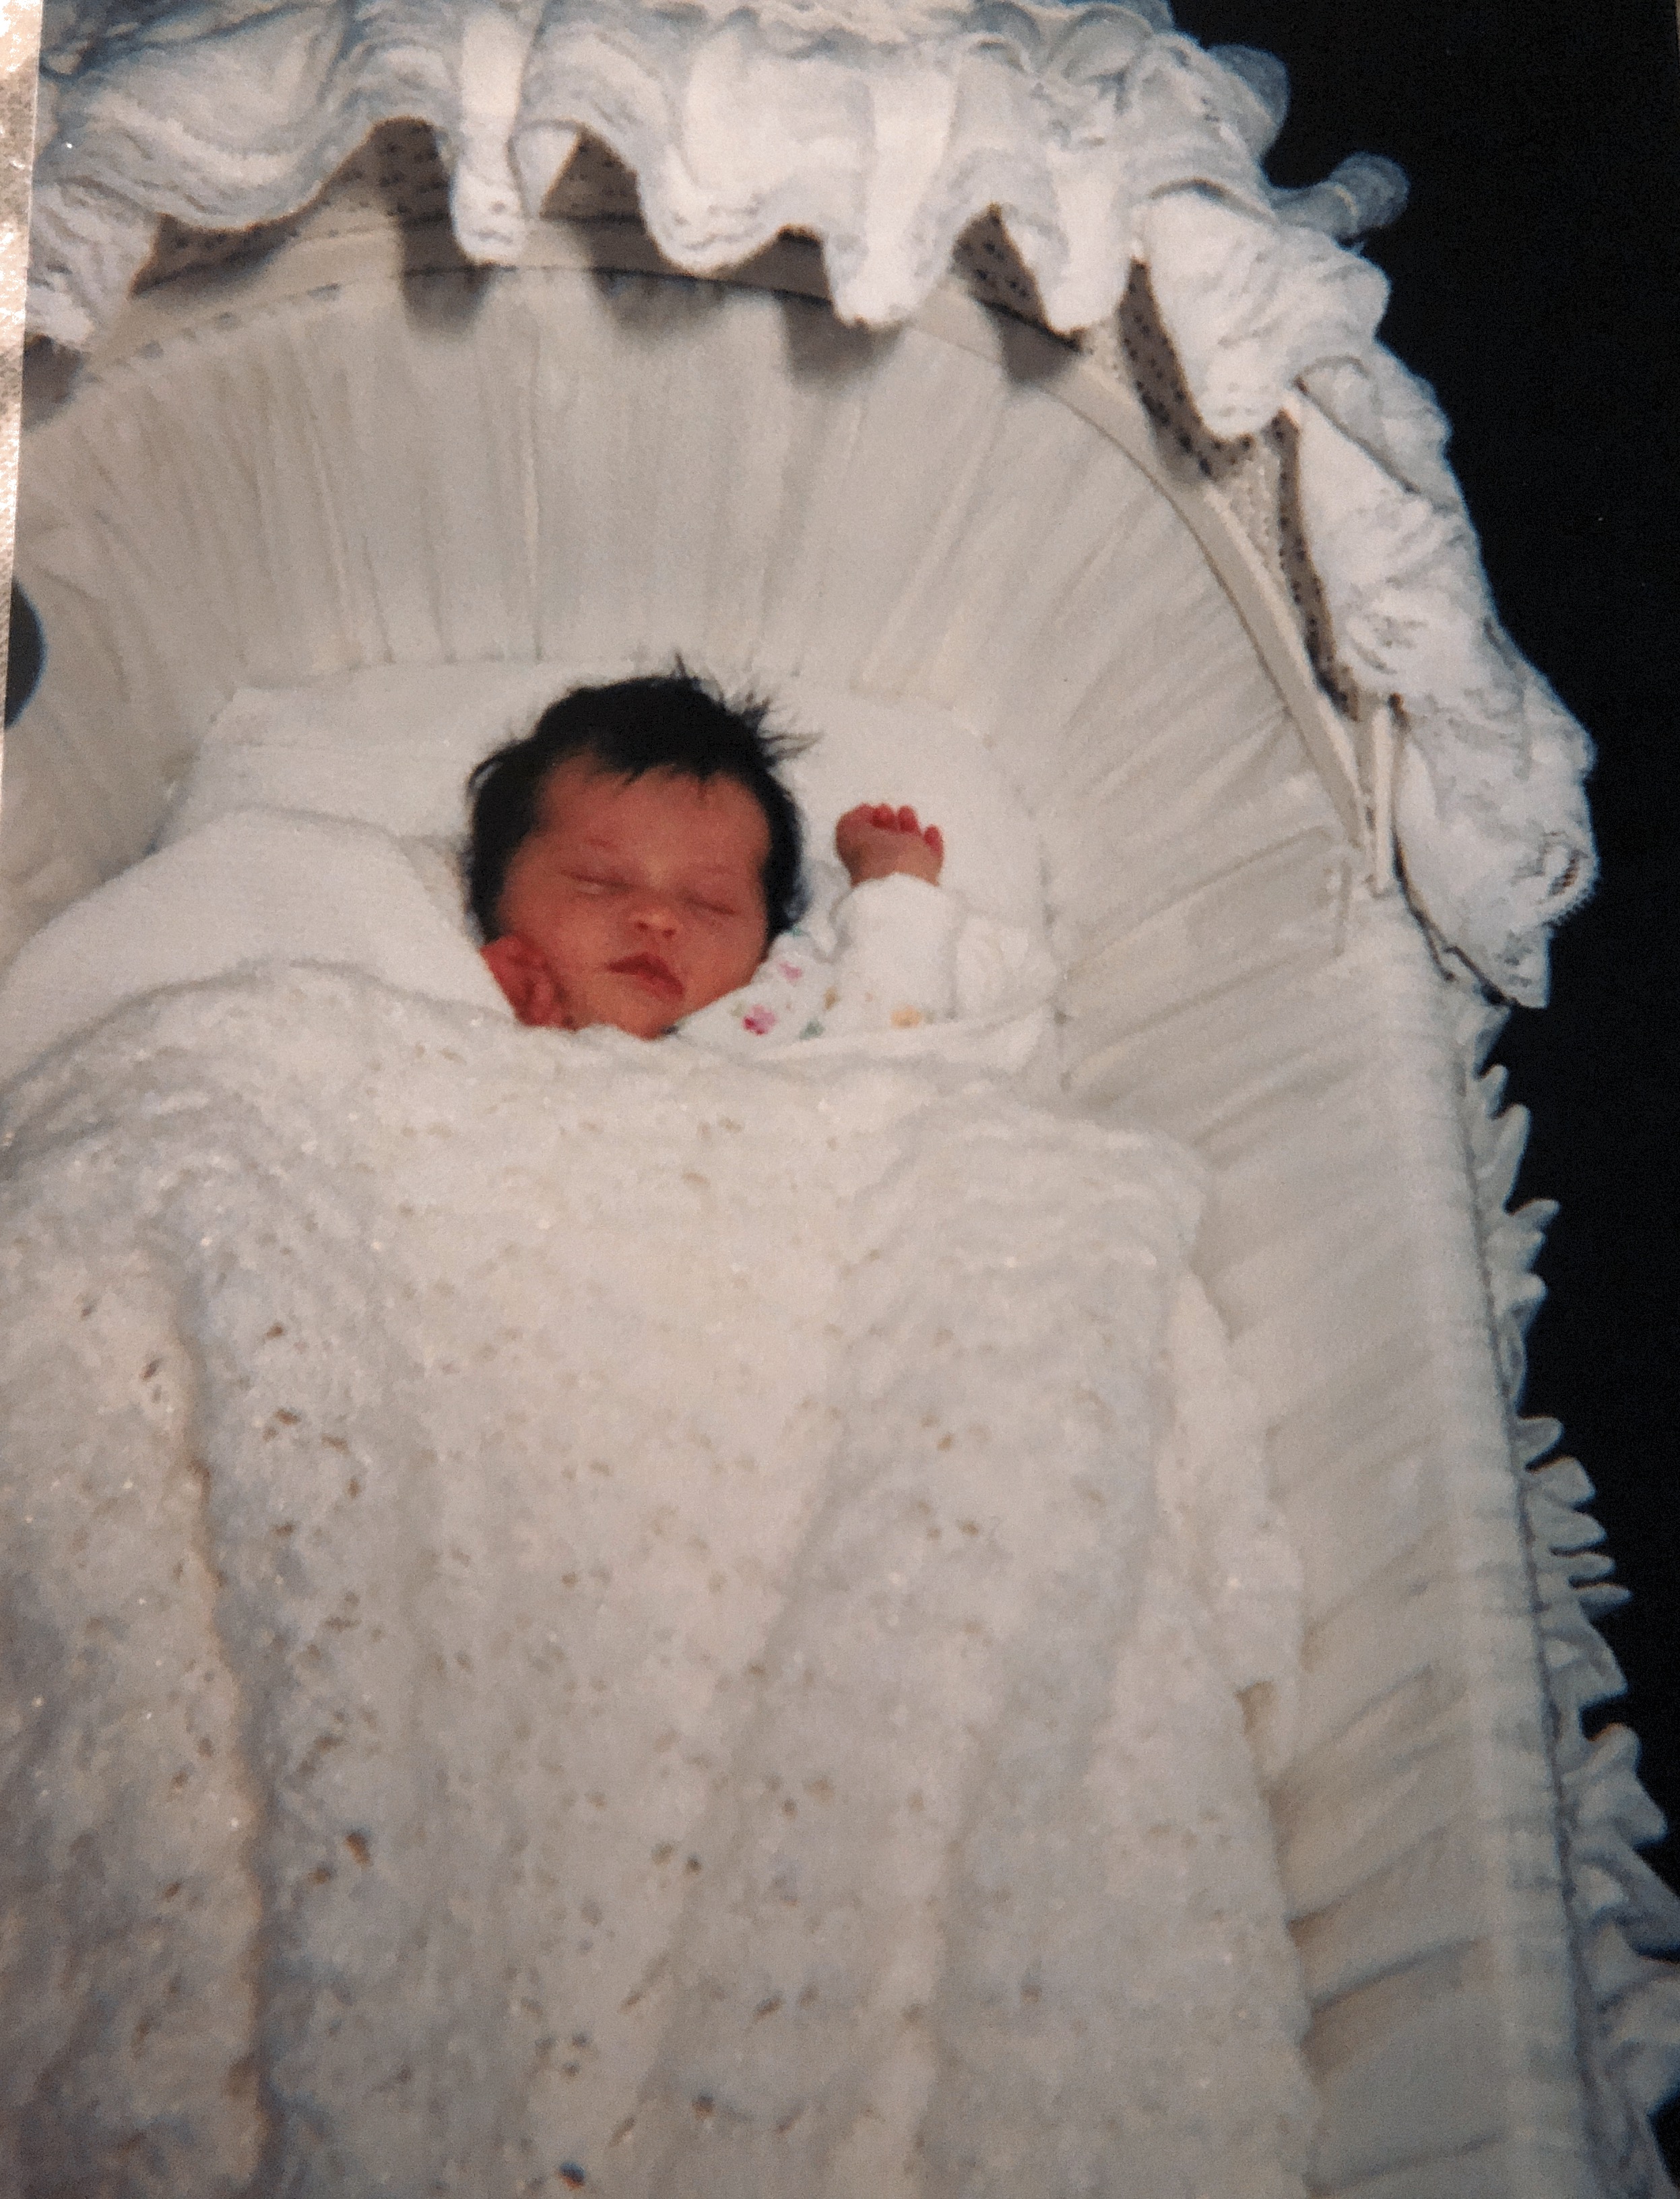 Well the is me after I was born in march 28 1998 in 5:50 am and this photo was taken in March 29 of 1998 I have a super Duper tired from the day I got out of my mom stomach I was a happy little girl my parents didn’t know I was born differently because I am born with a disability 